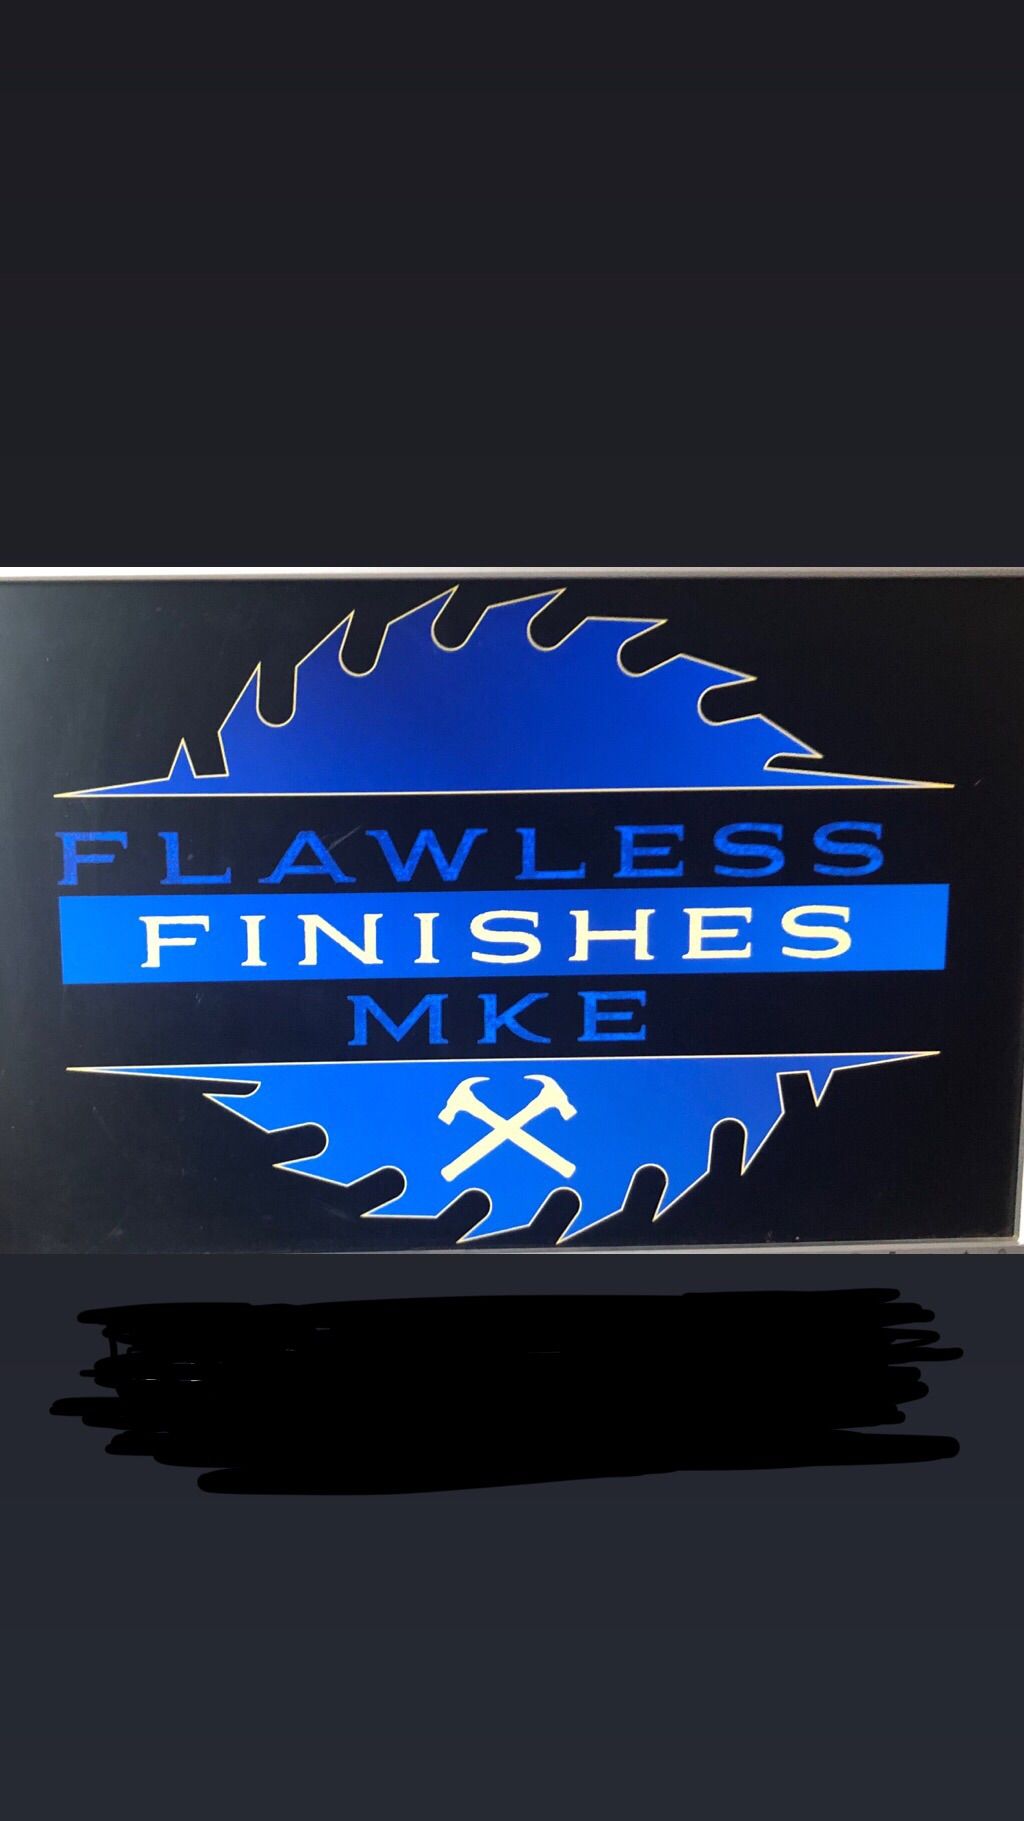 Flawless Finishes MKE